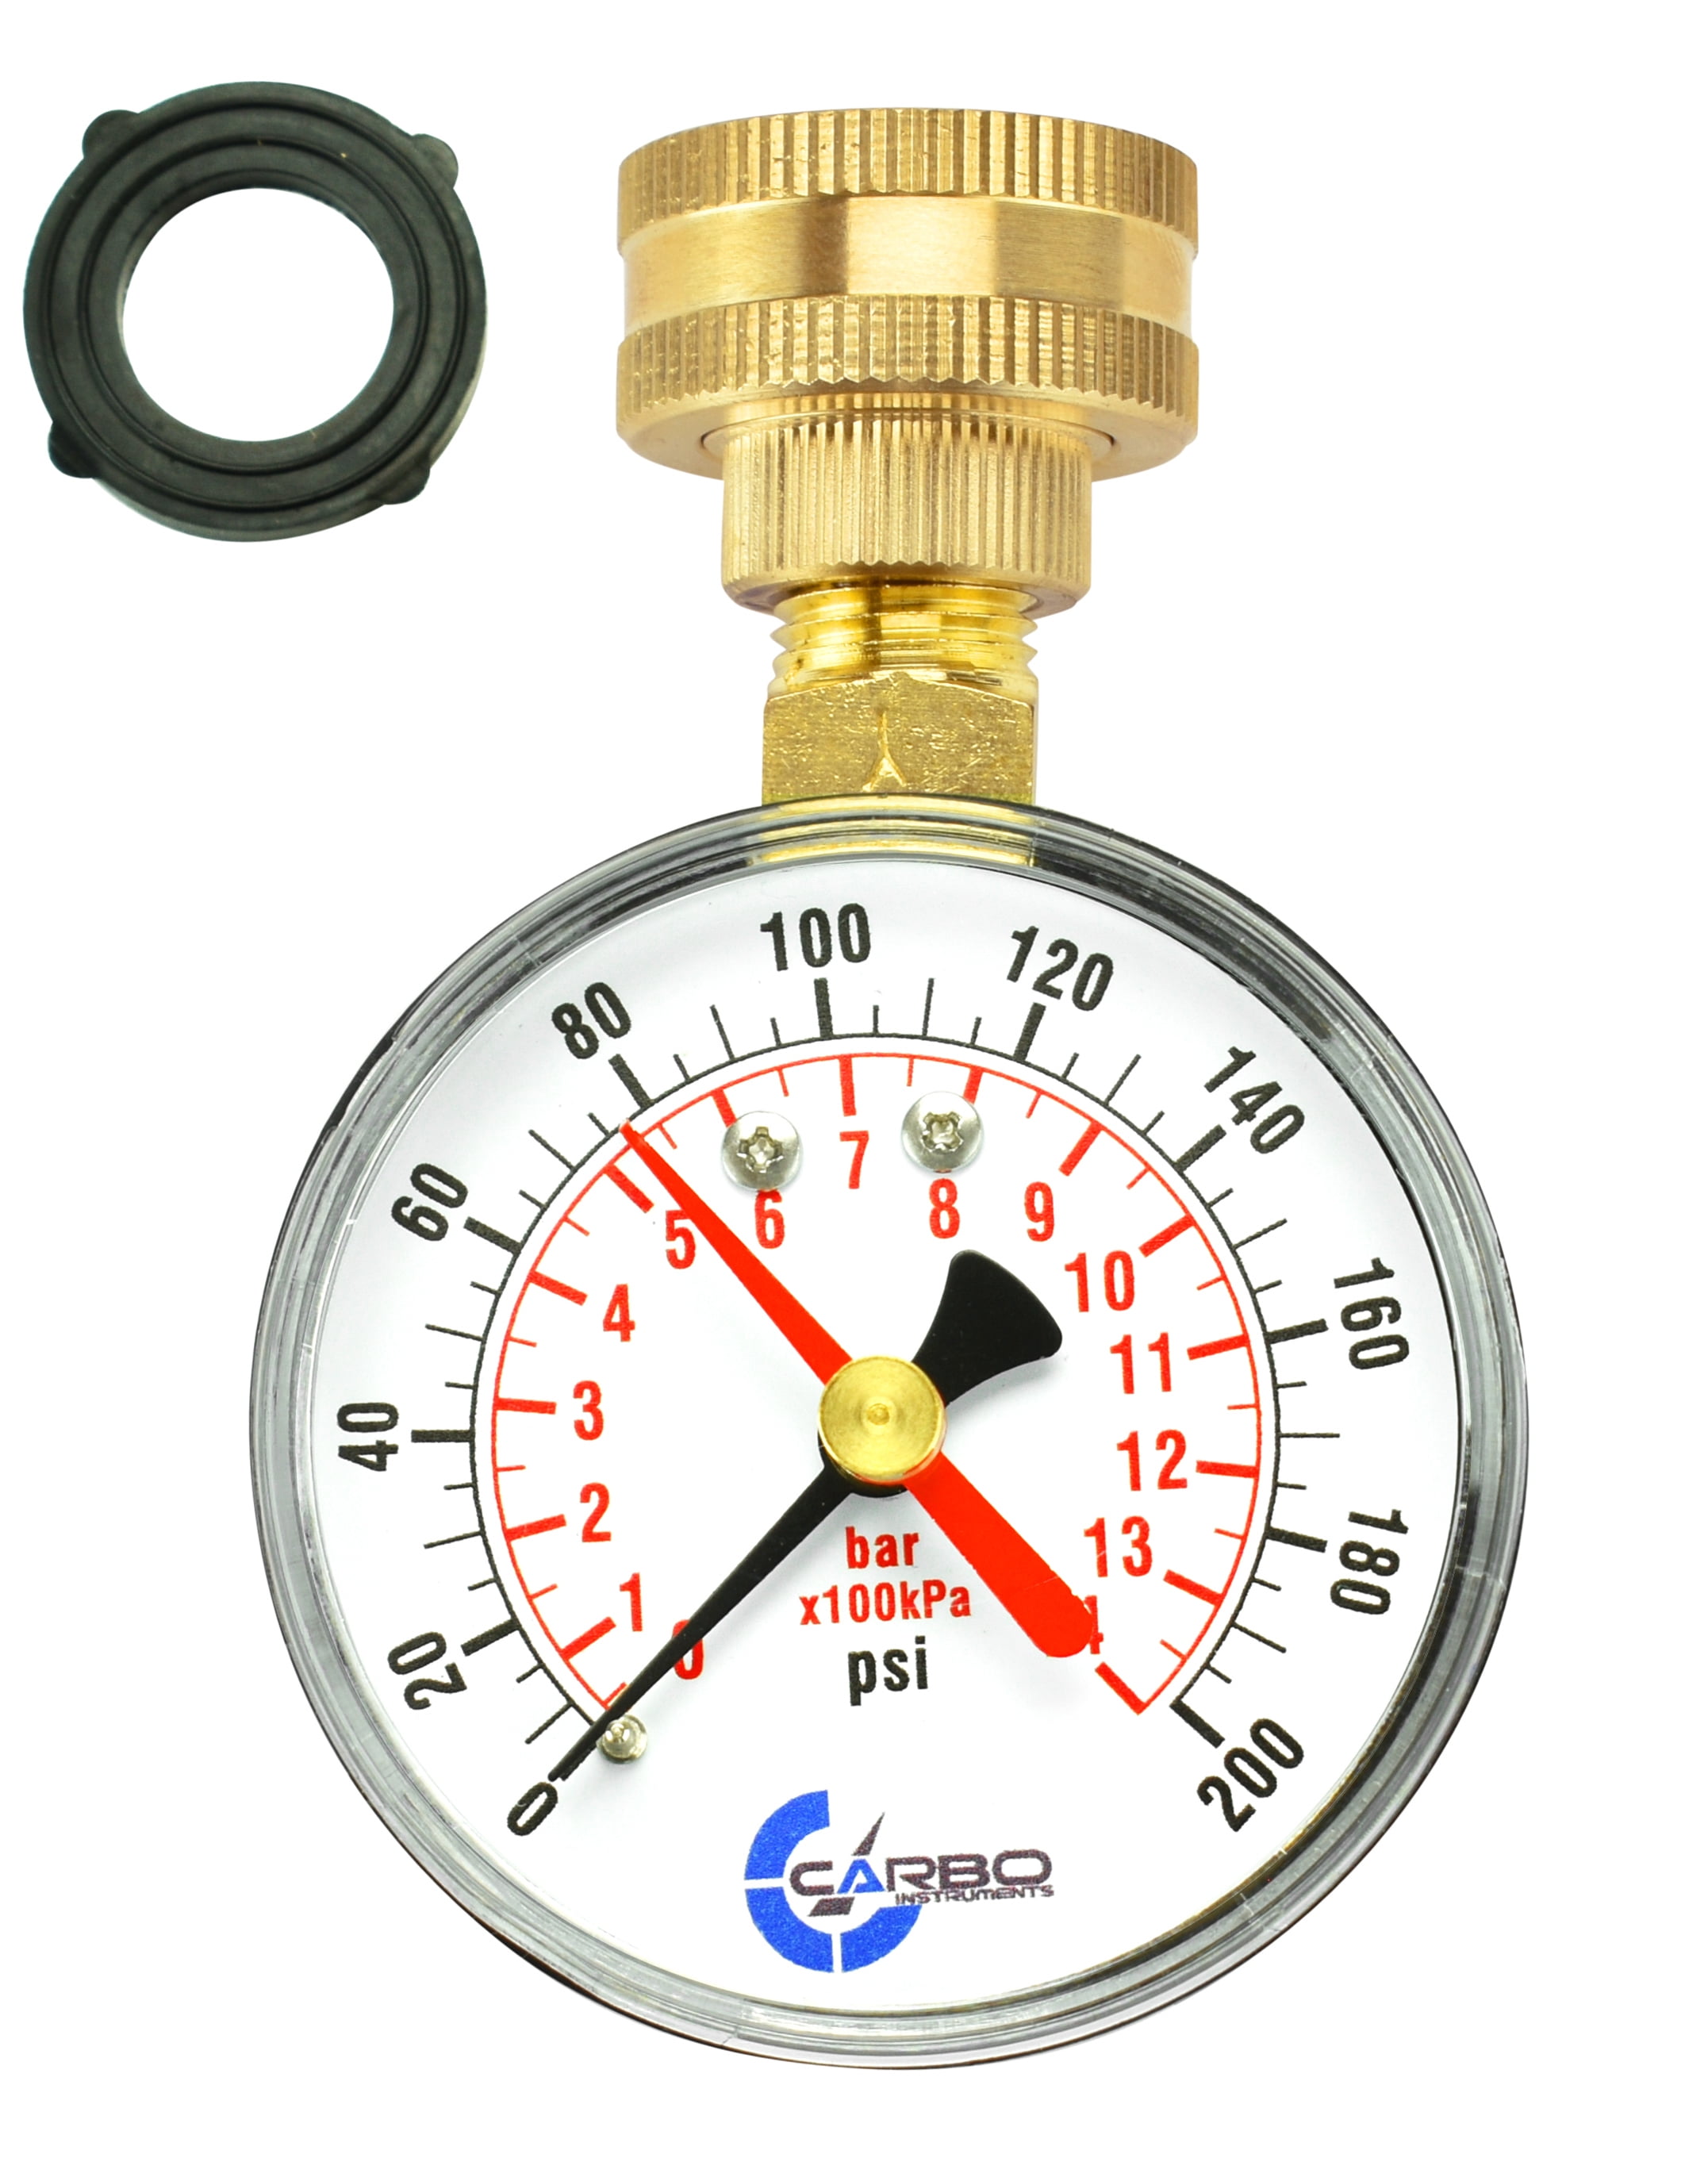 200 PSI Wal-Rich Water Test Gauge 3/4" FGHT Lot of 1 #1721002 